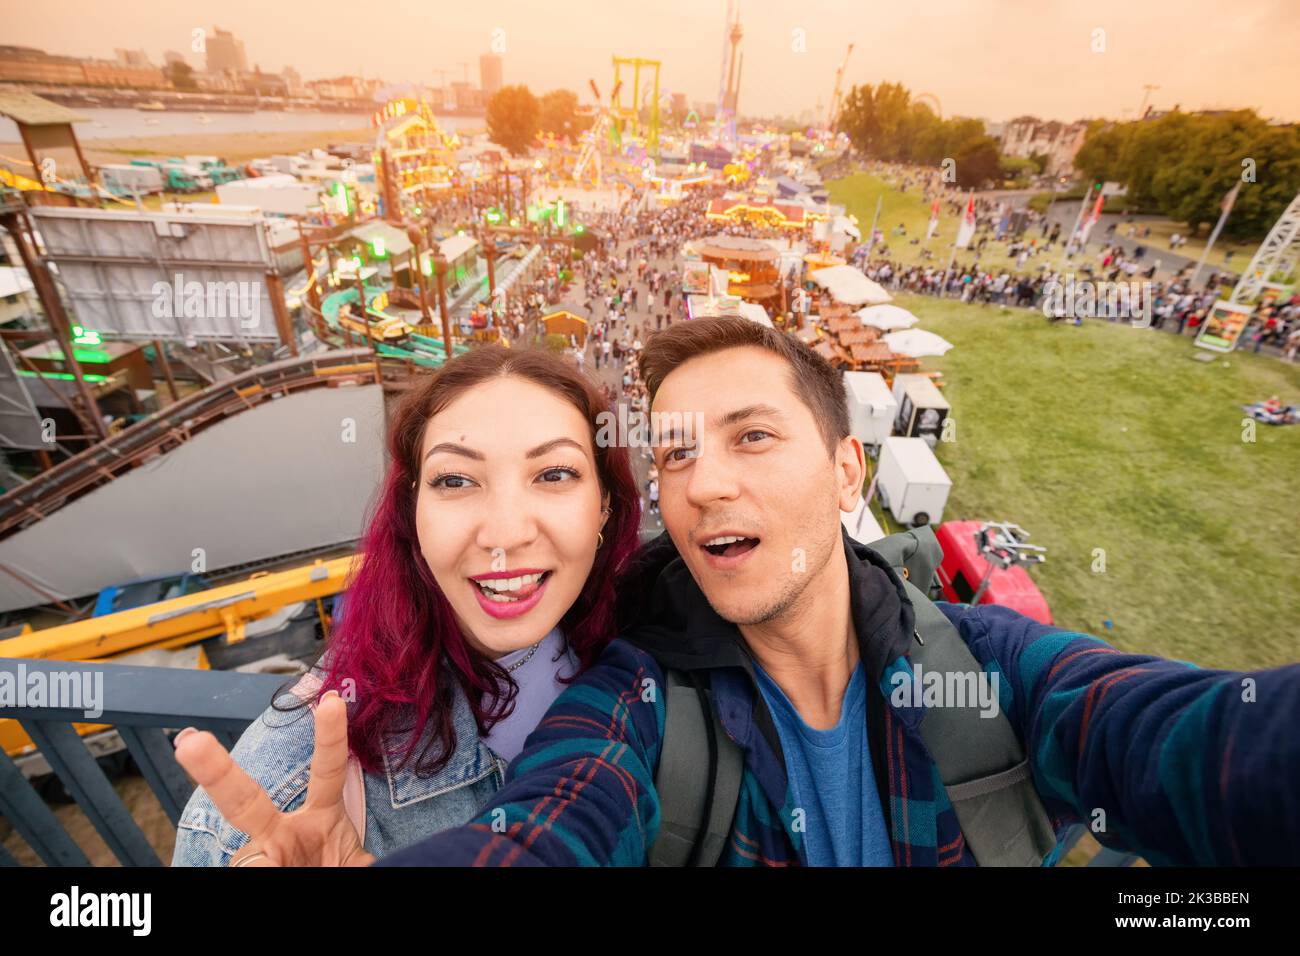 Tourist couple taking selfie photo at amusement fair and many eateries at a traditional festival on the park near bank of the Rhine river in Dusseldor Stock Photo